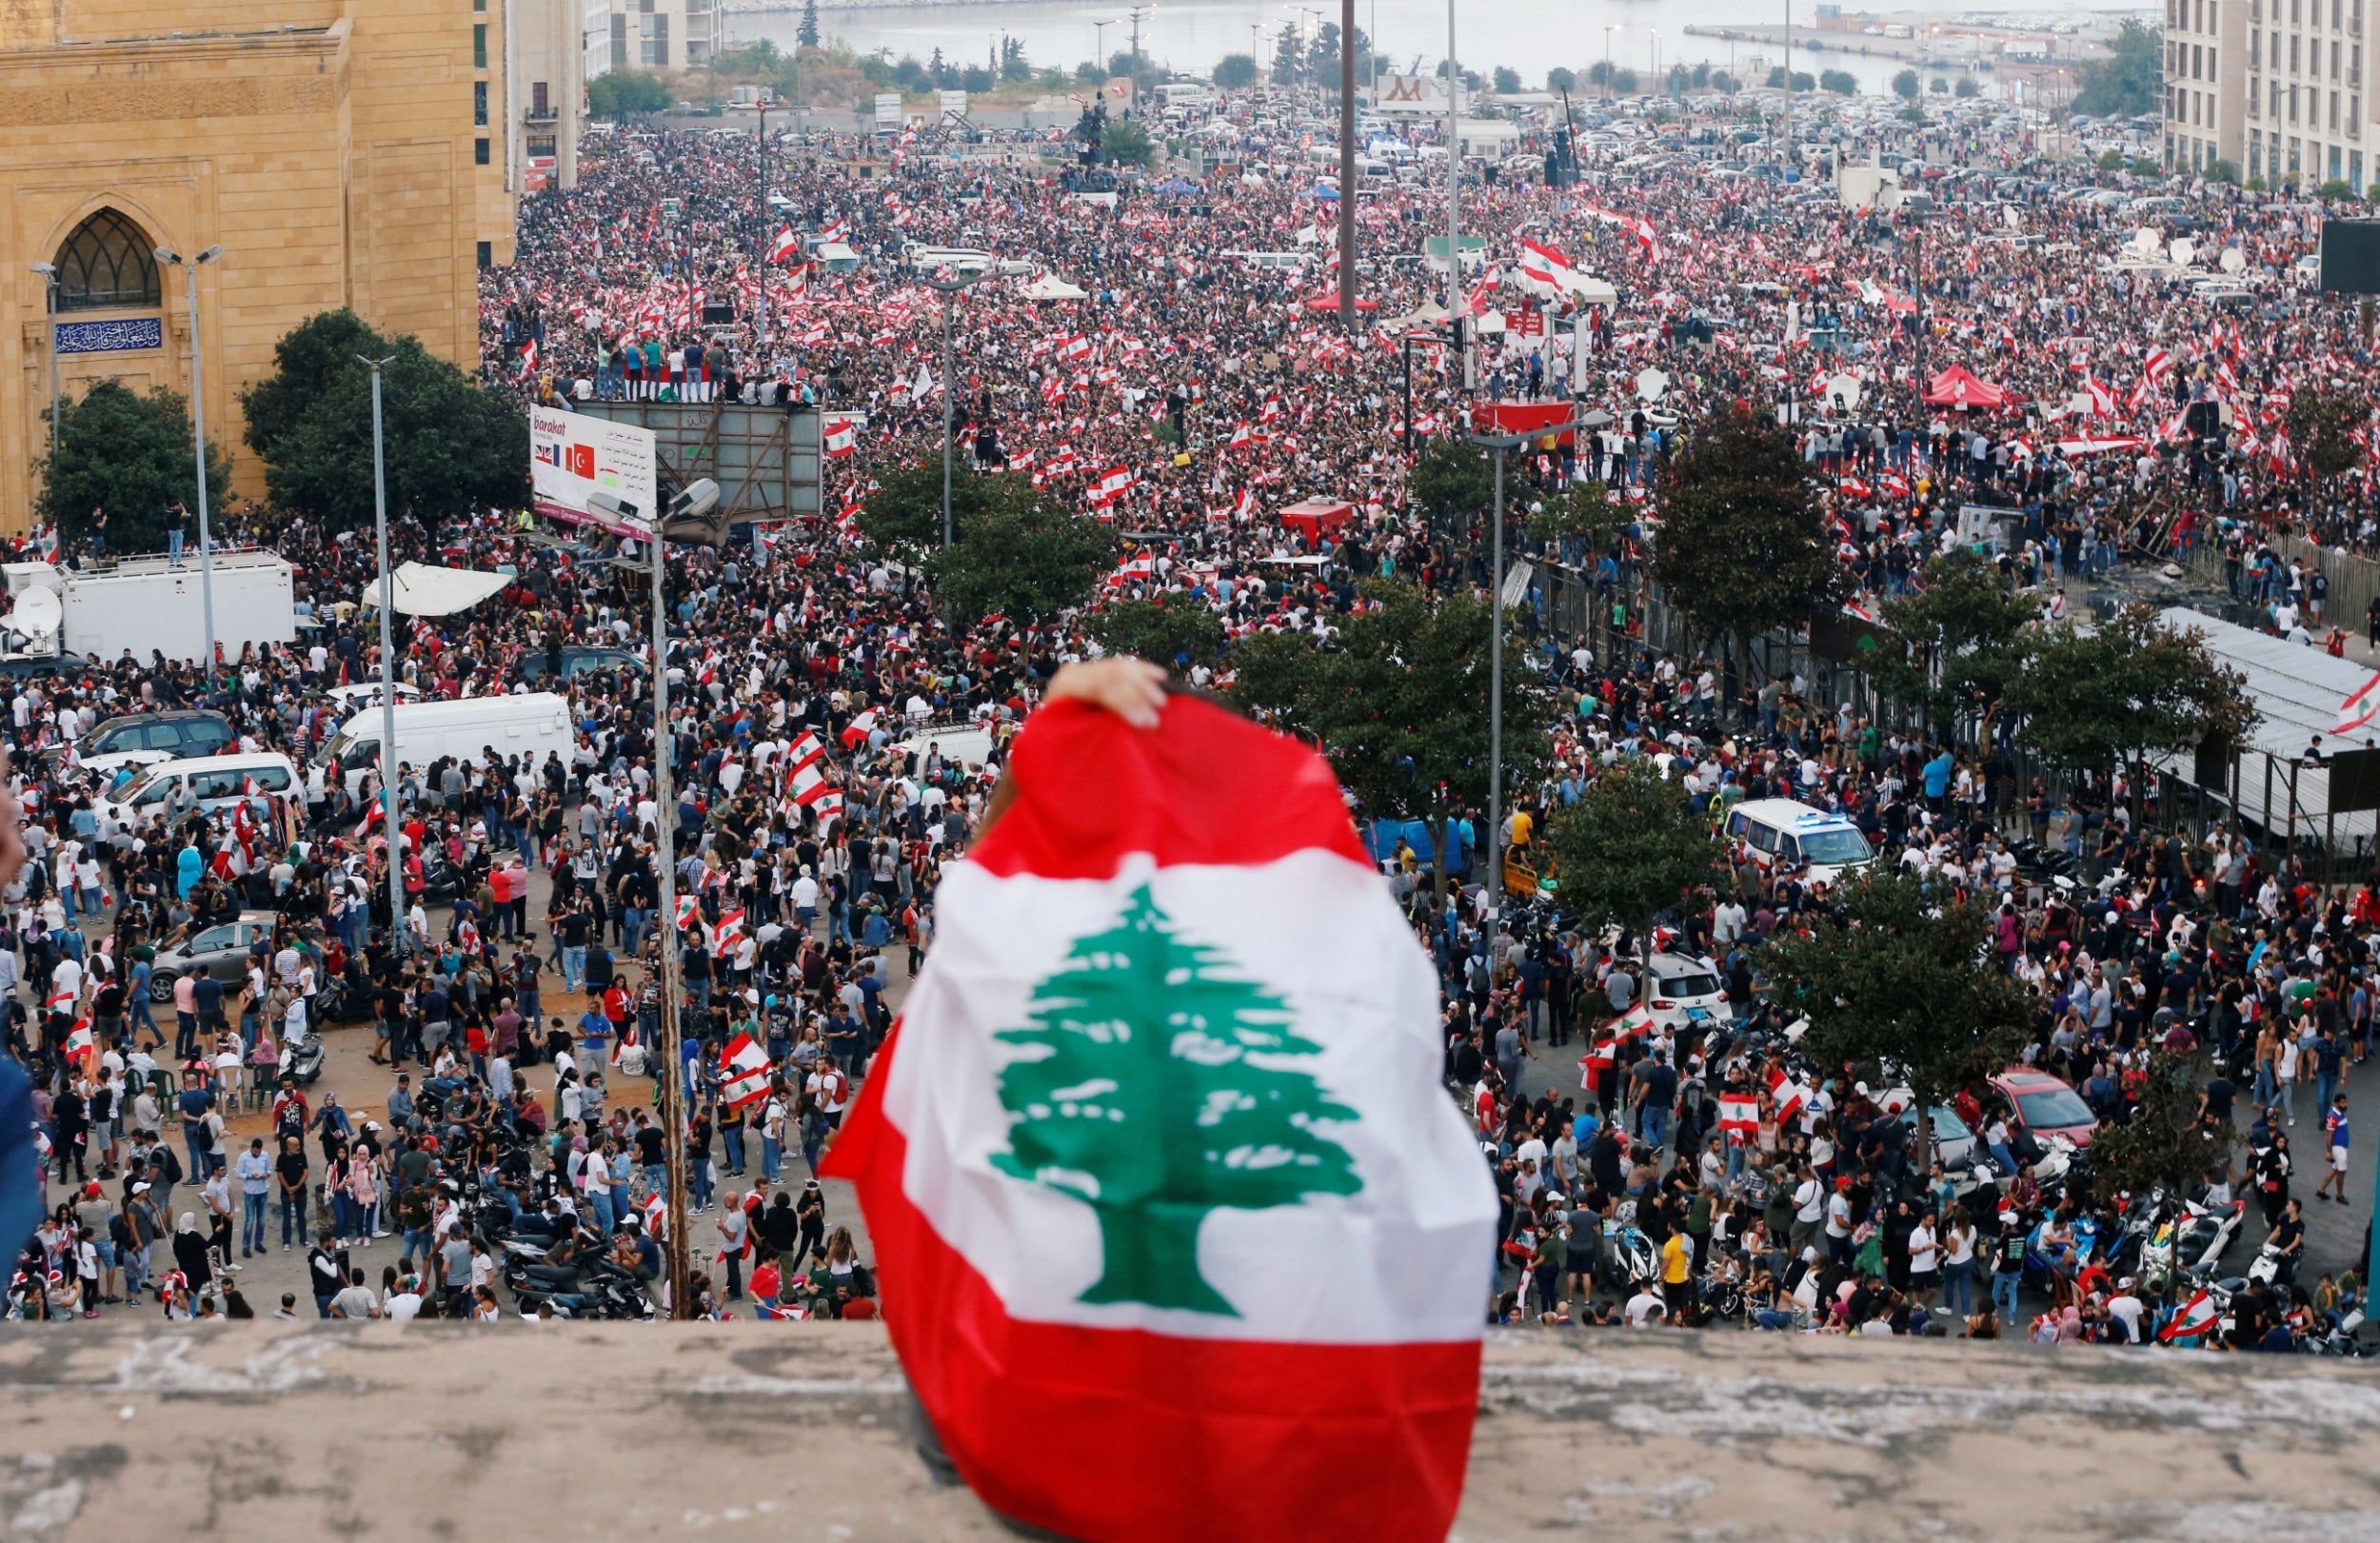 An anti-government protest in downtown Beirut continued into Monday